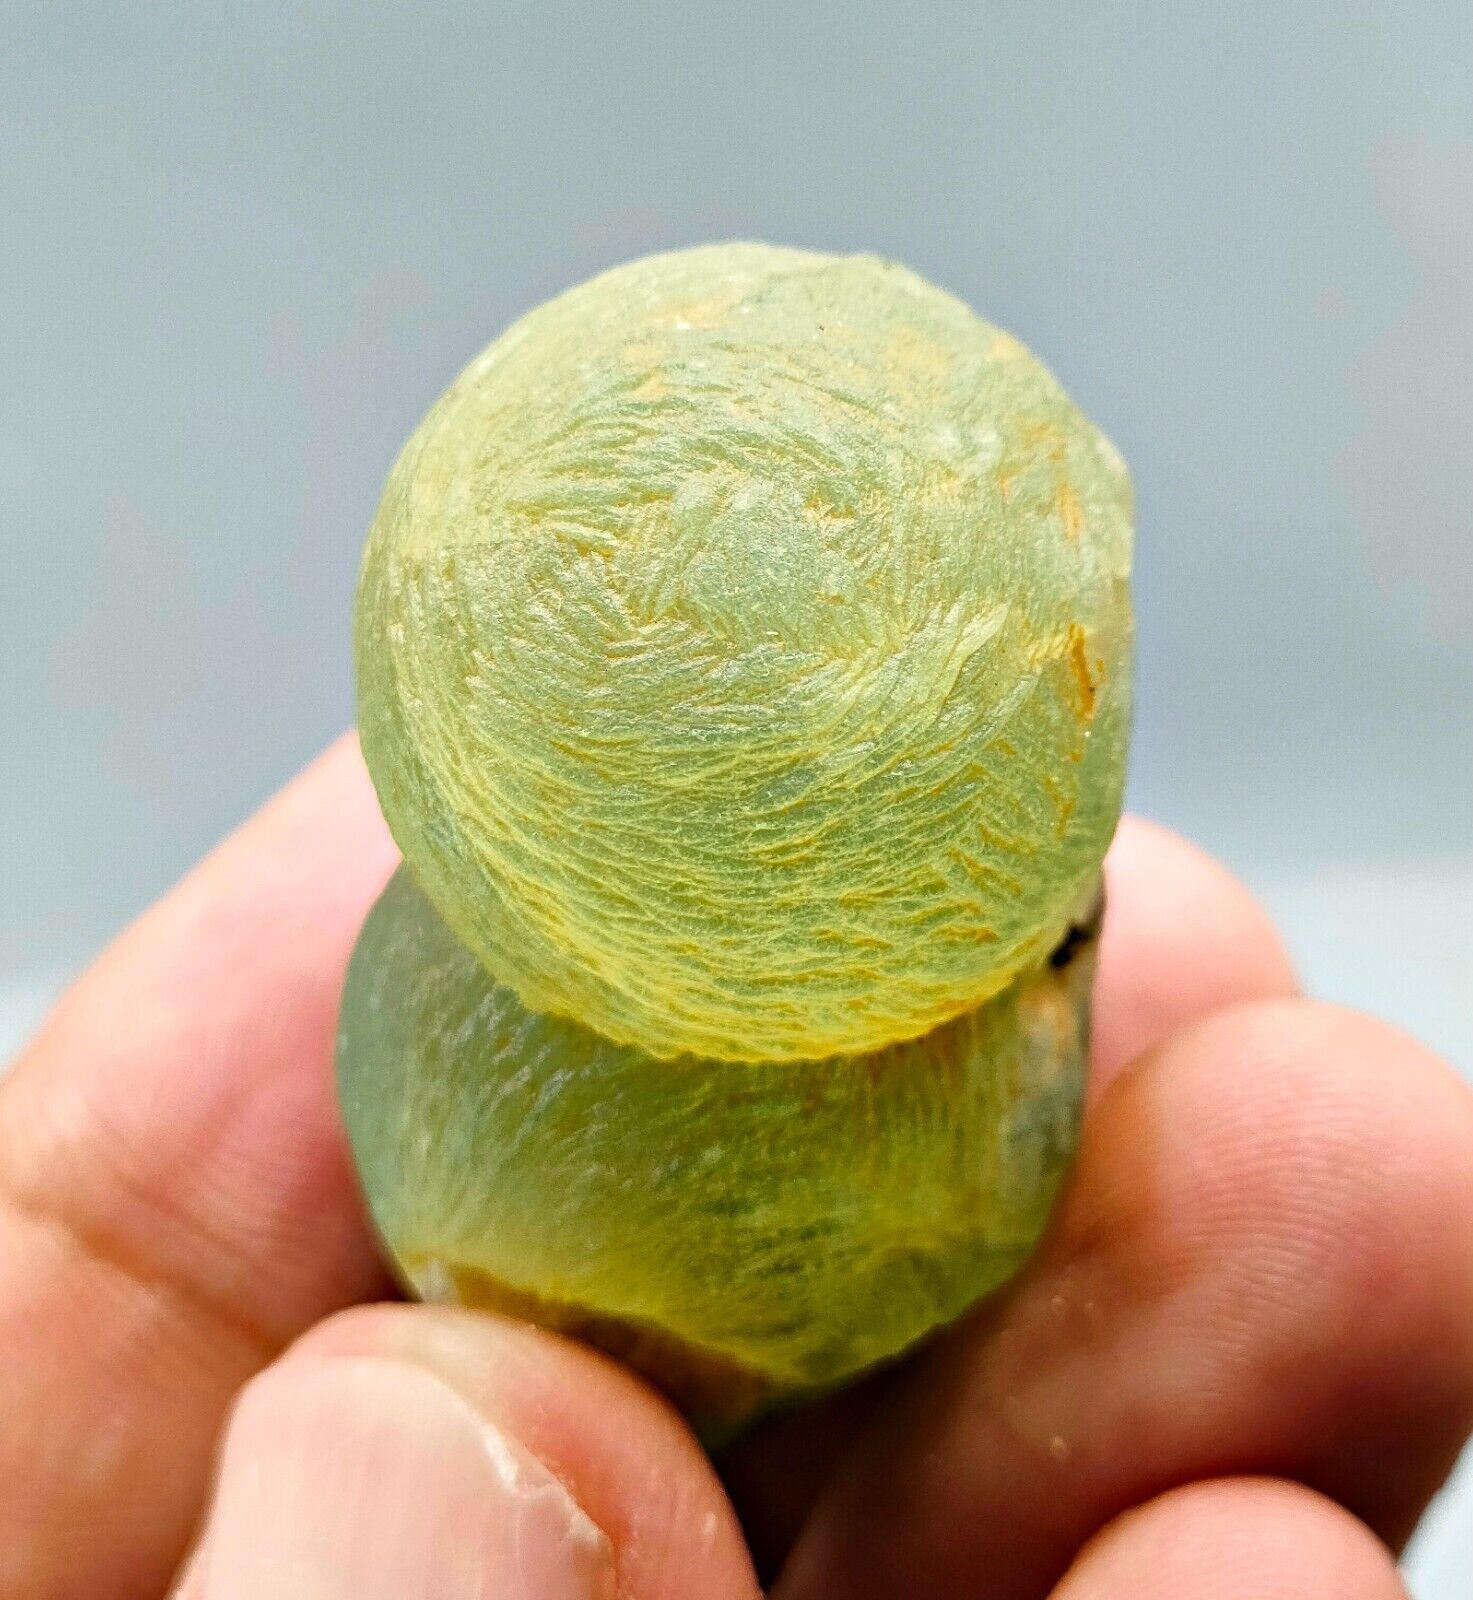 133 CTs Transparent Extremely Rare Natural Prehnite On Epidote Specimen~ Africa